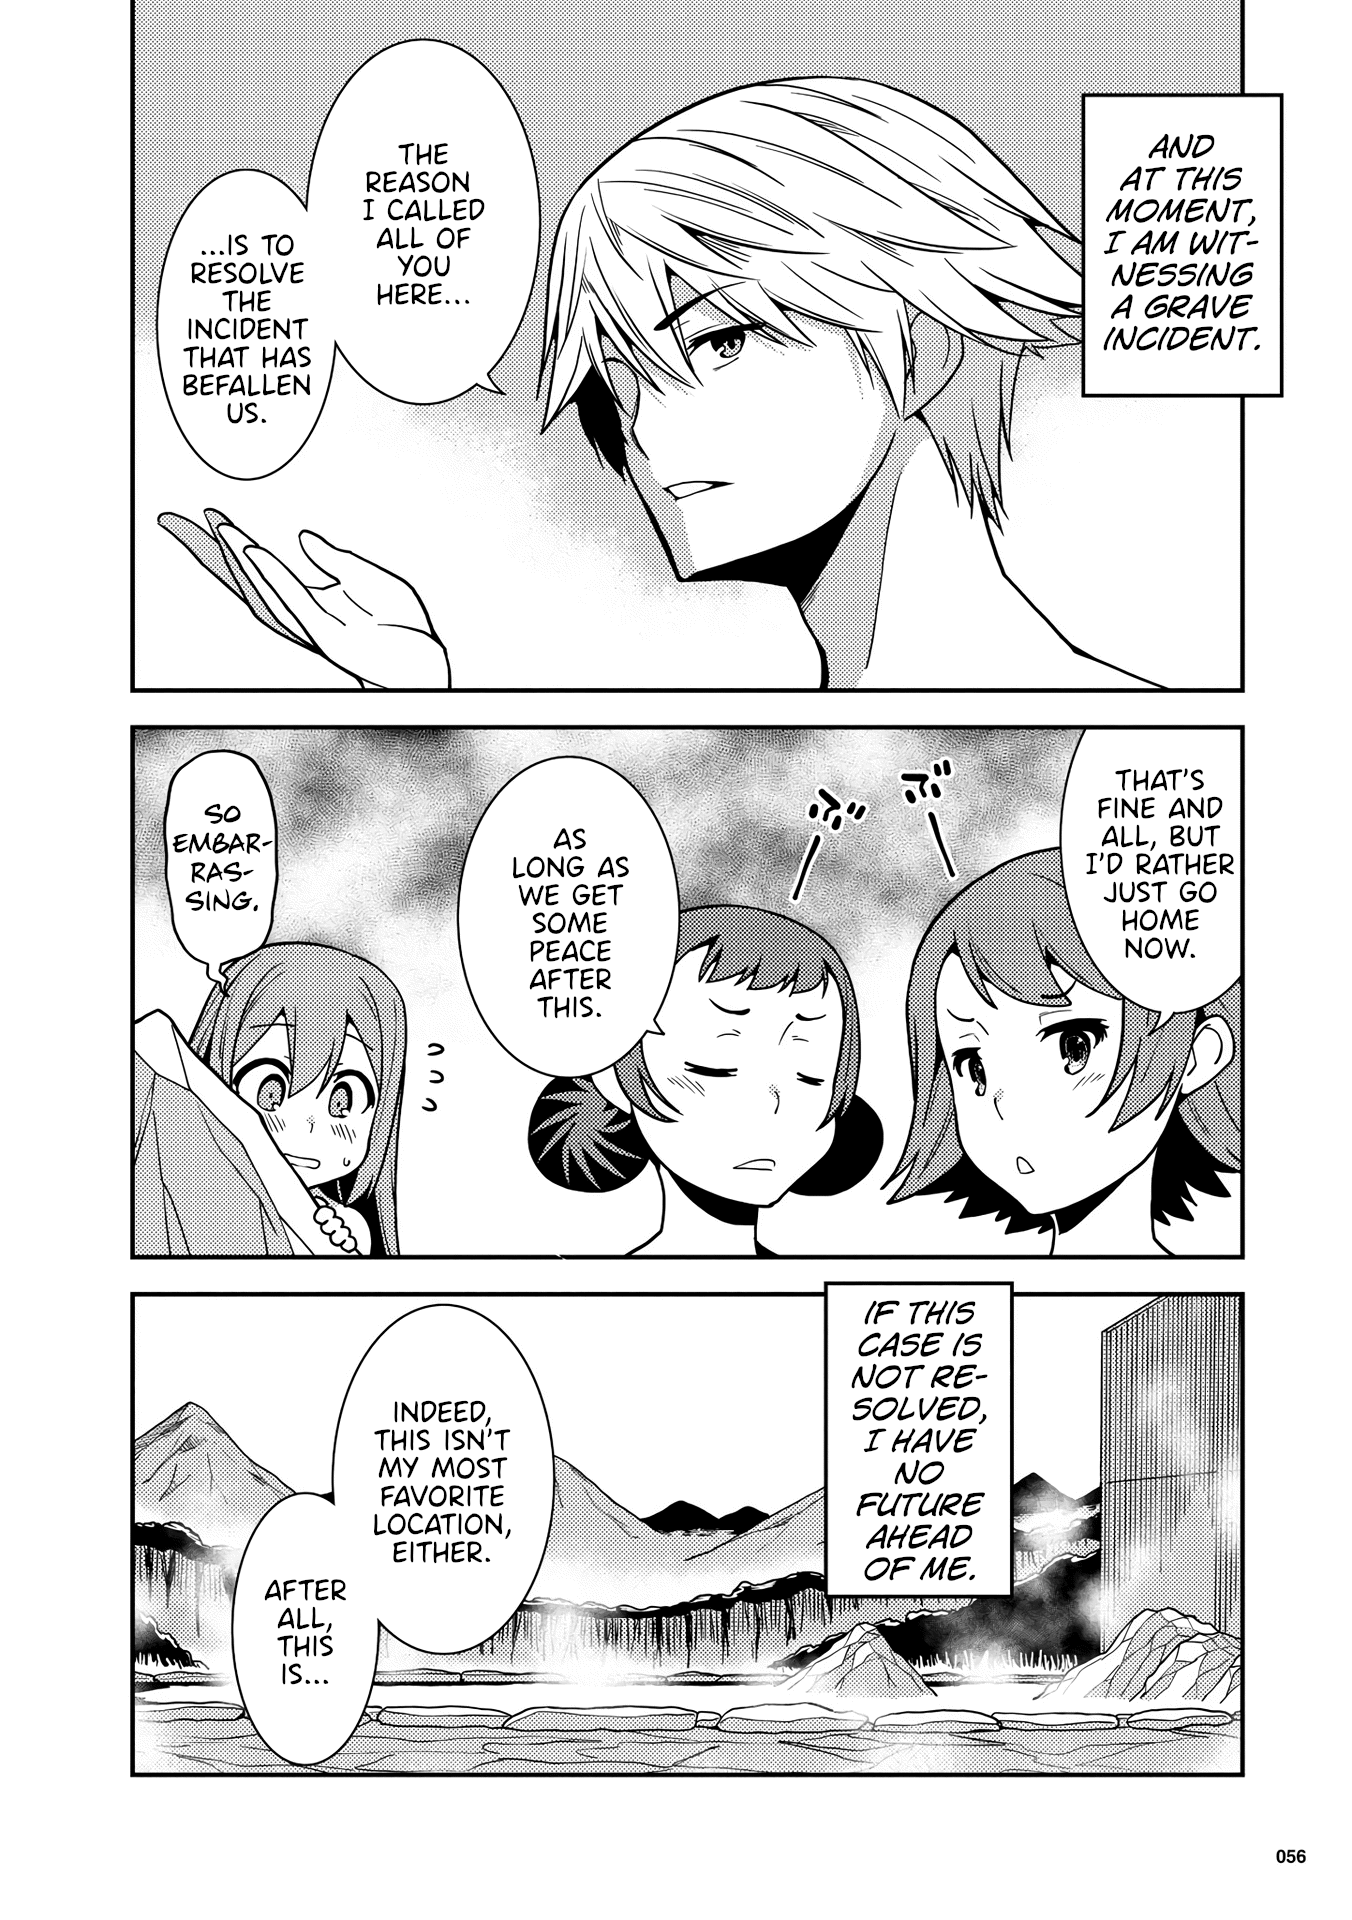 Girls From Different Worlds - Page 2